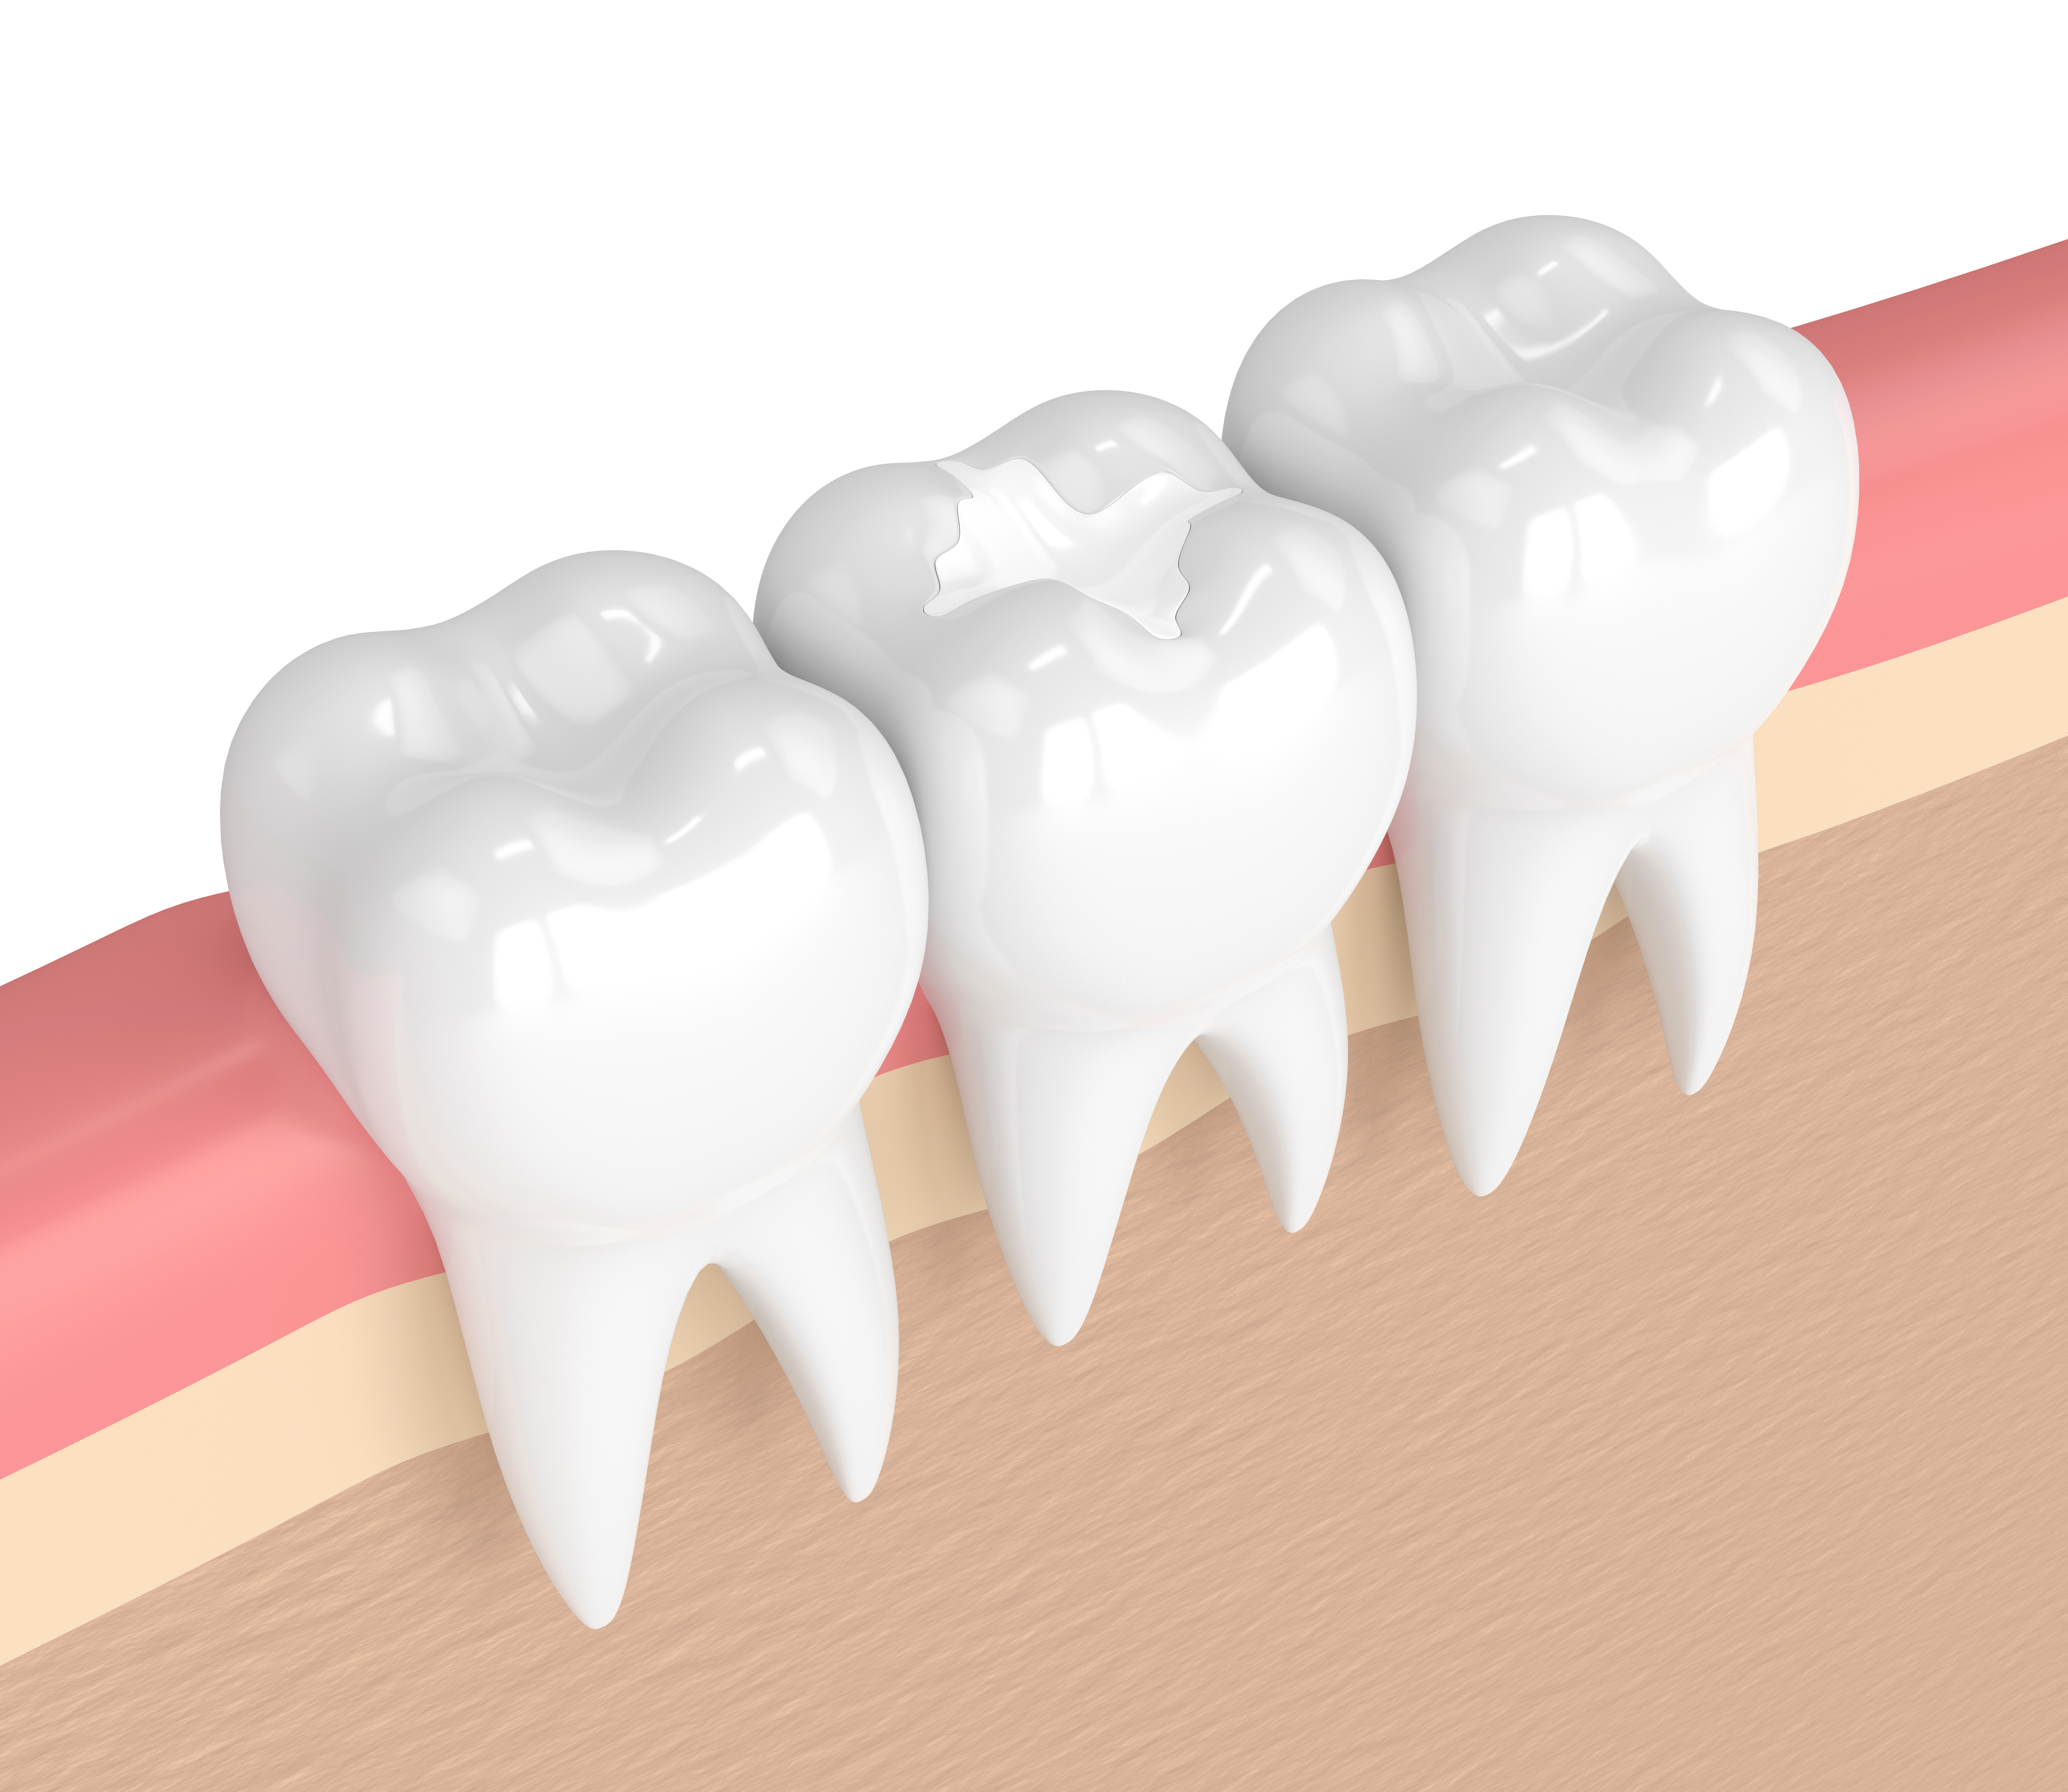 Types of Tooth Fillings - Dental Tips